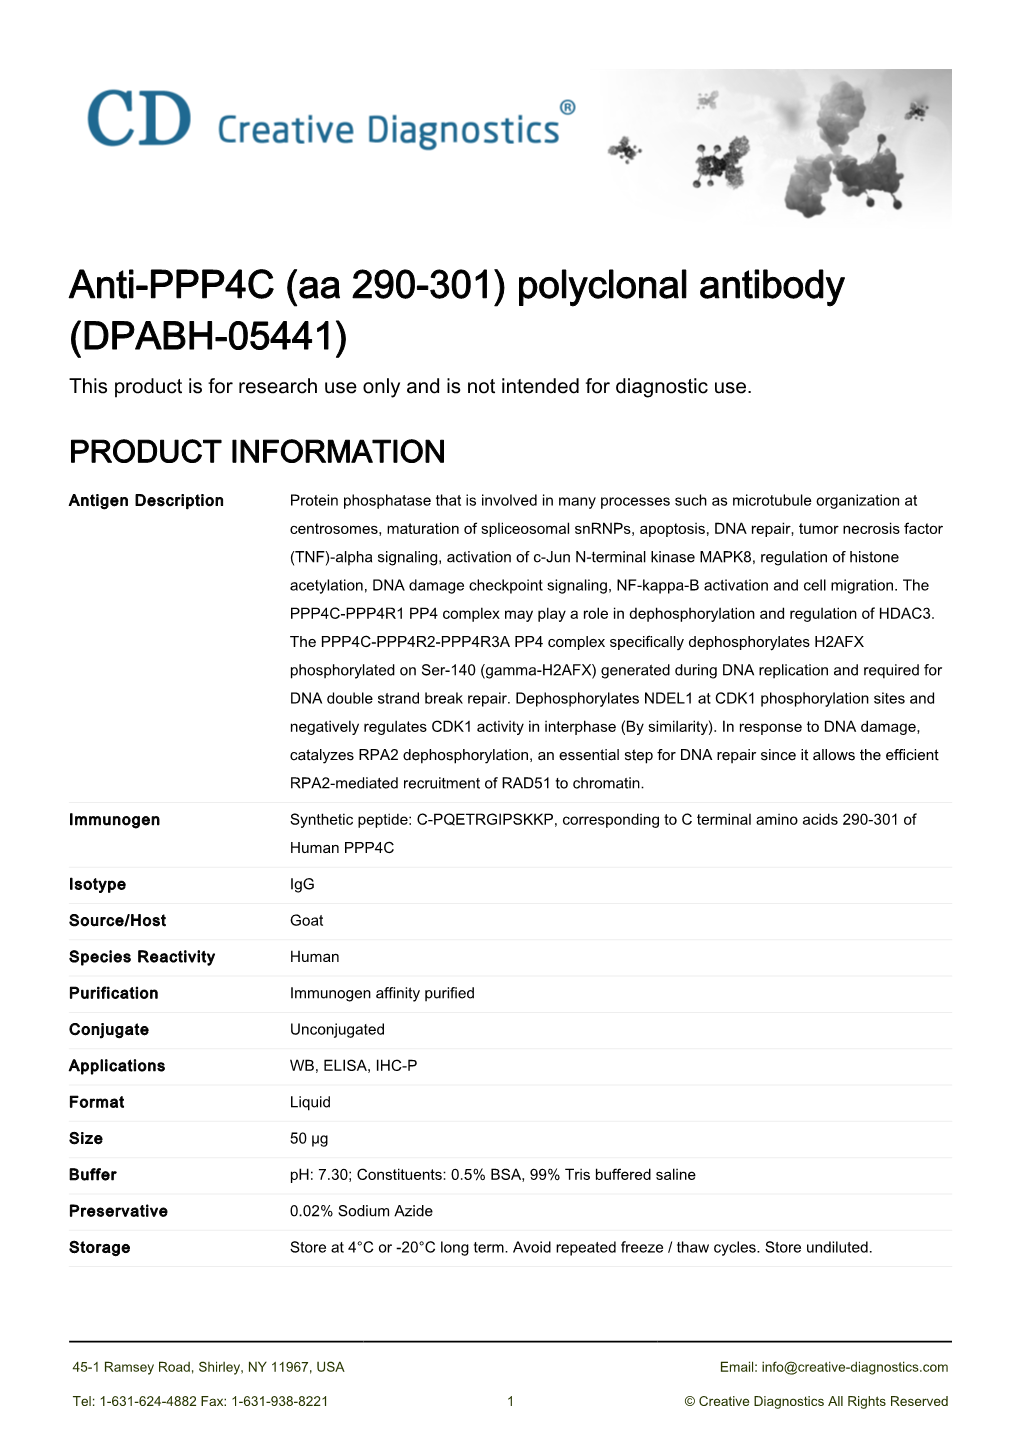 Anti-PPP4C (Aa 290-301) Polyclonal Antibody (DPABH-05441) This Product Is for Research Use Only and Is Not Intended for Diagnostic Use